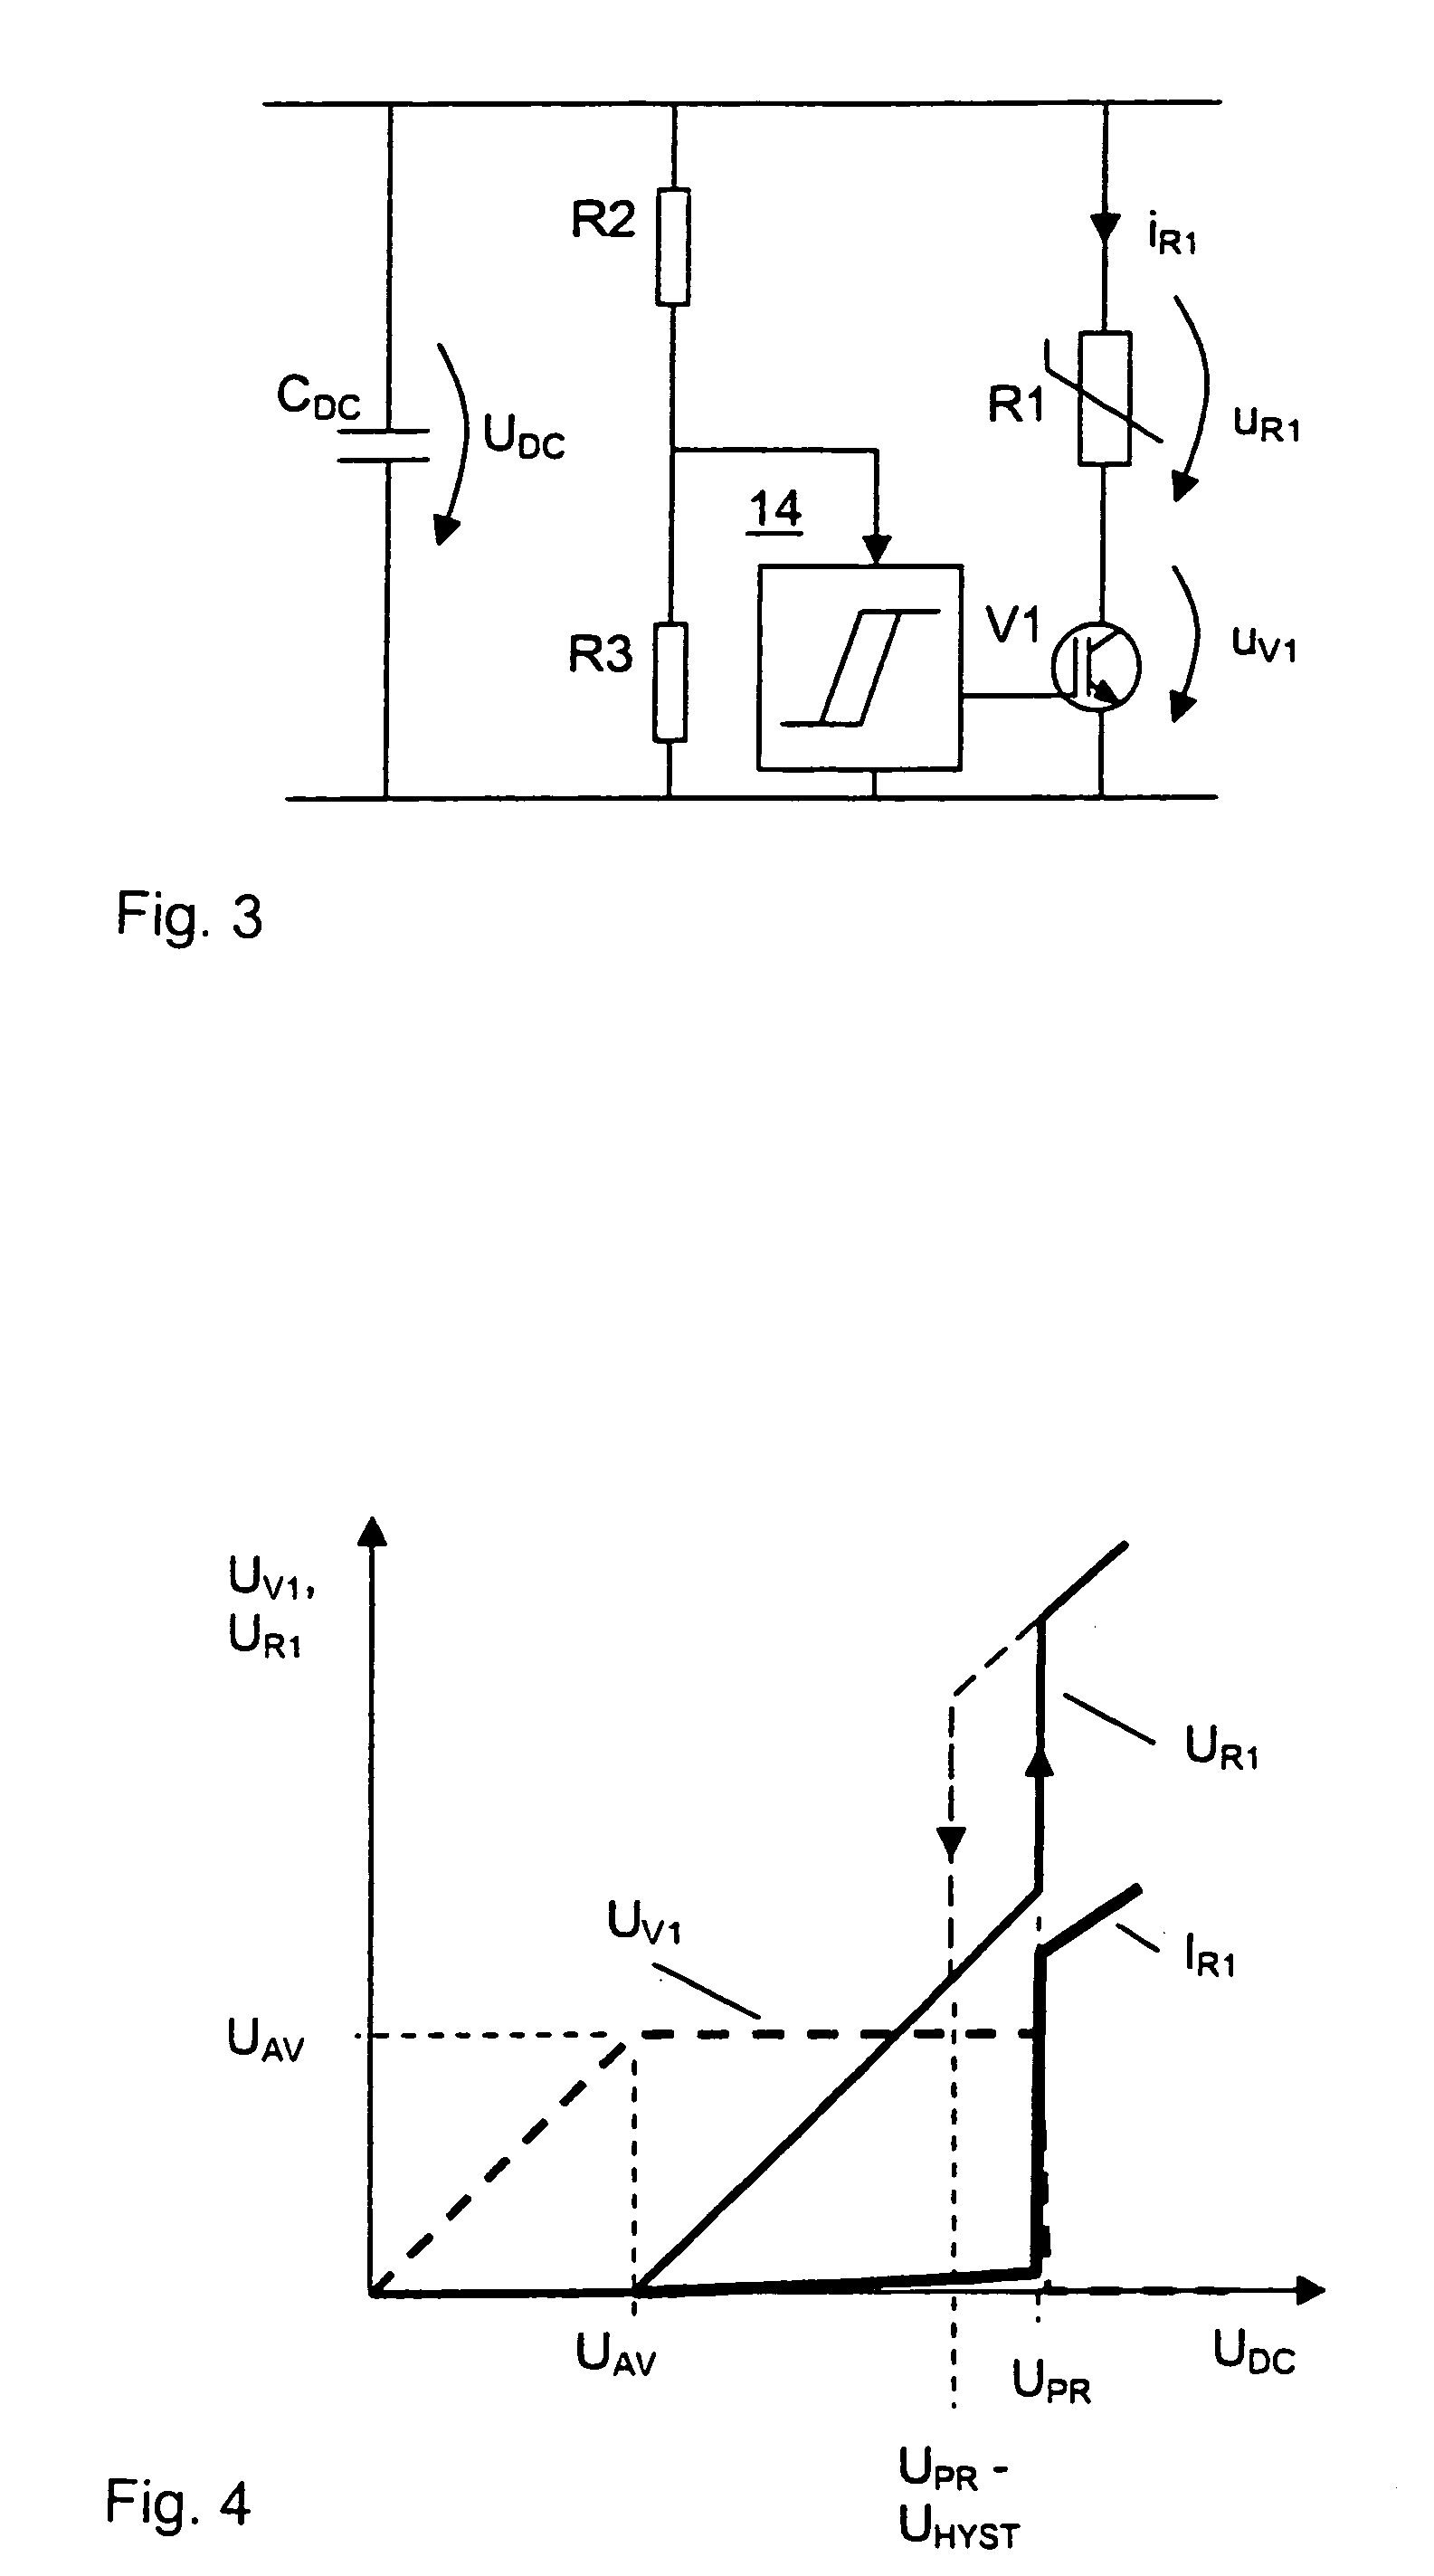 Overvoltage protection of a frequency converter